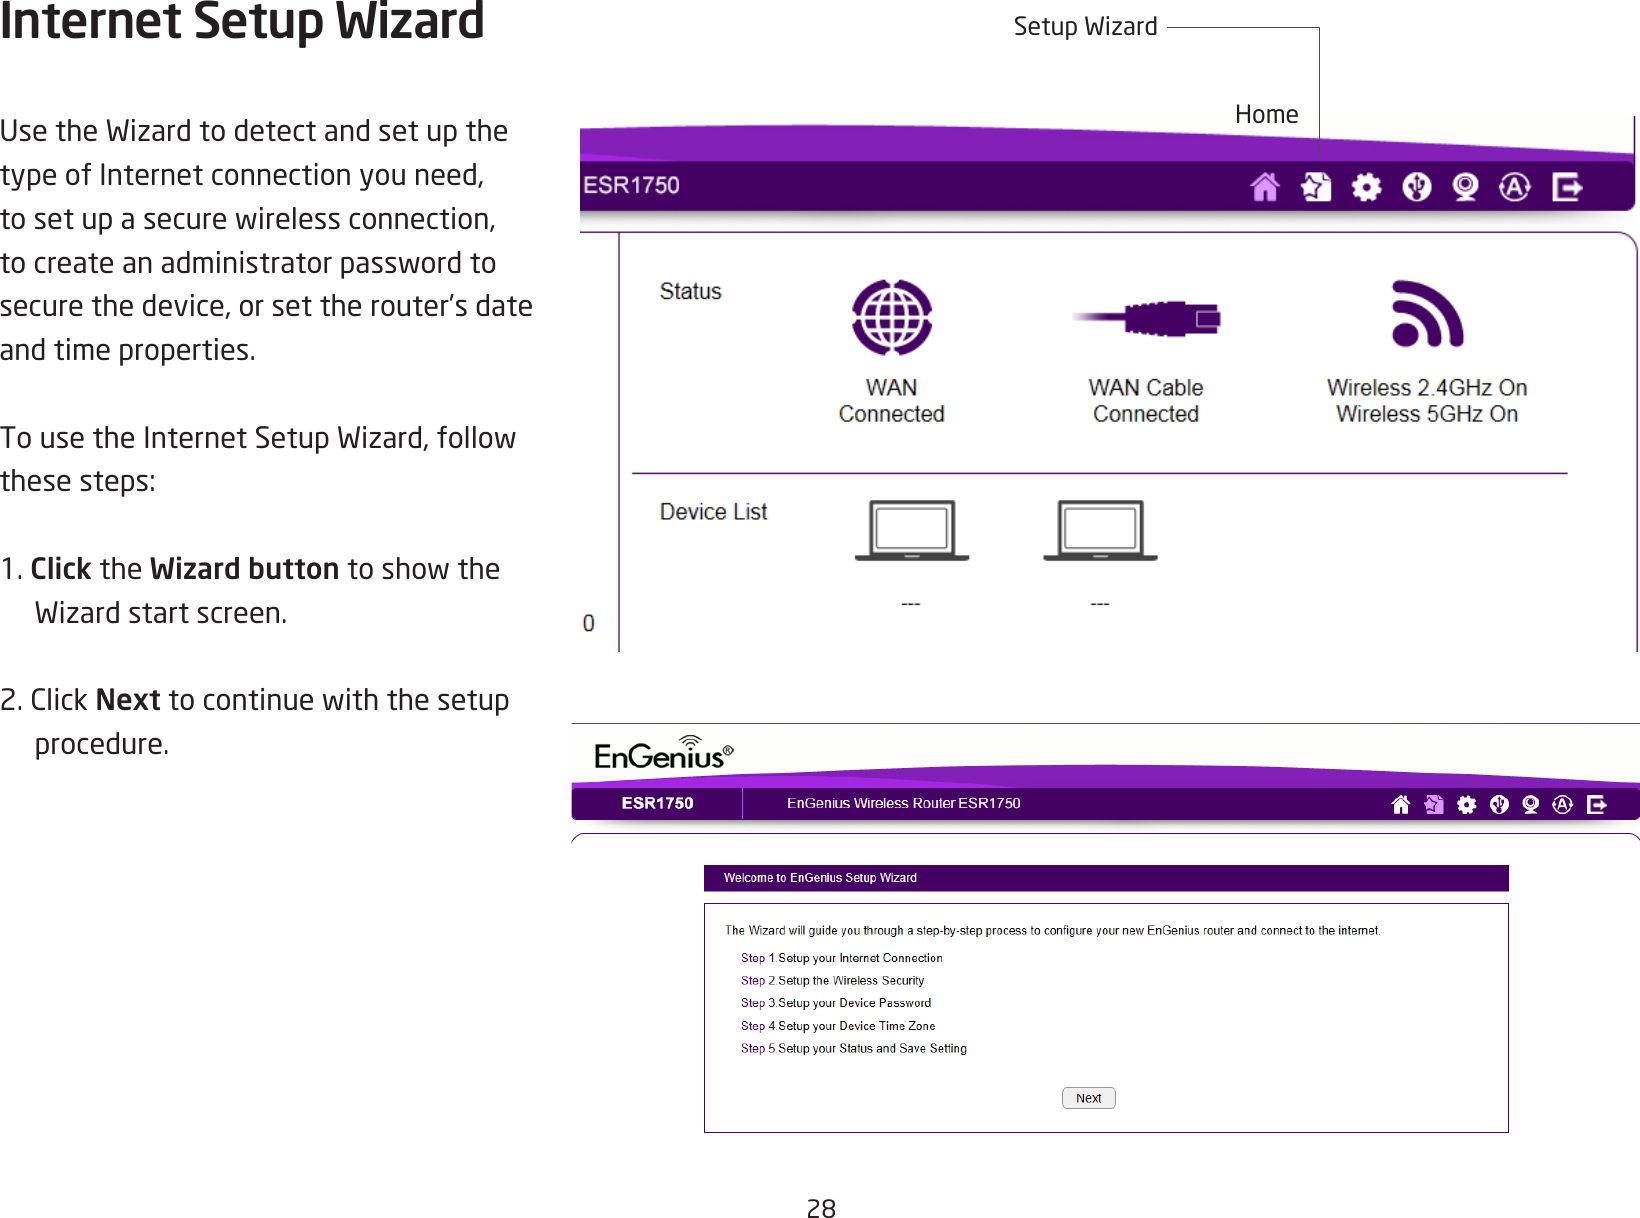 28Internet Setup WizardUsetheWizardtodetectandsetupthetype of Internet connection you need, tosetupasecurewirelessconnection,tocreateanadministratorpasswordtosecure the device, or set the router’s date and time properties.TousetheInternetSetupWizard,followthesesteps:1. Click the Wizard buttontoshowtheWizardstartscreen.2.ClickNexttocontinuewiththesetupprocedure.HomeSetupWizard